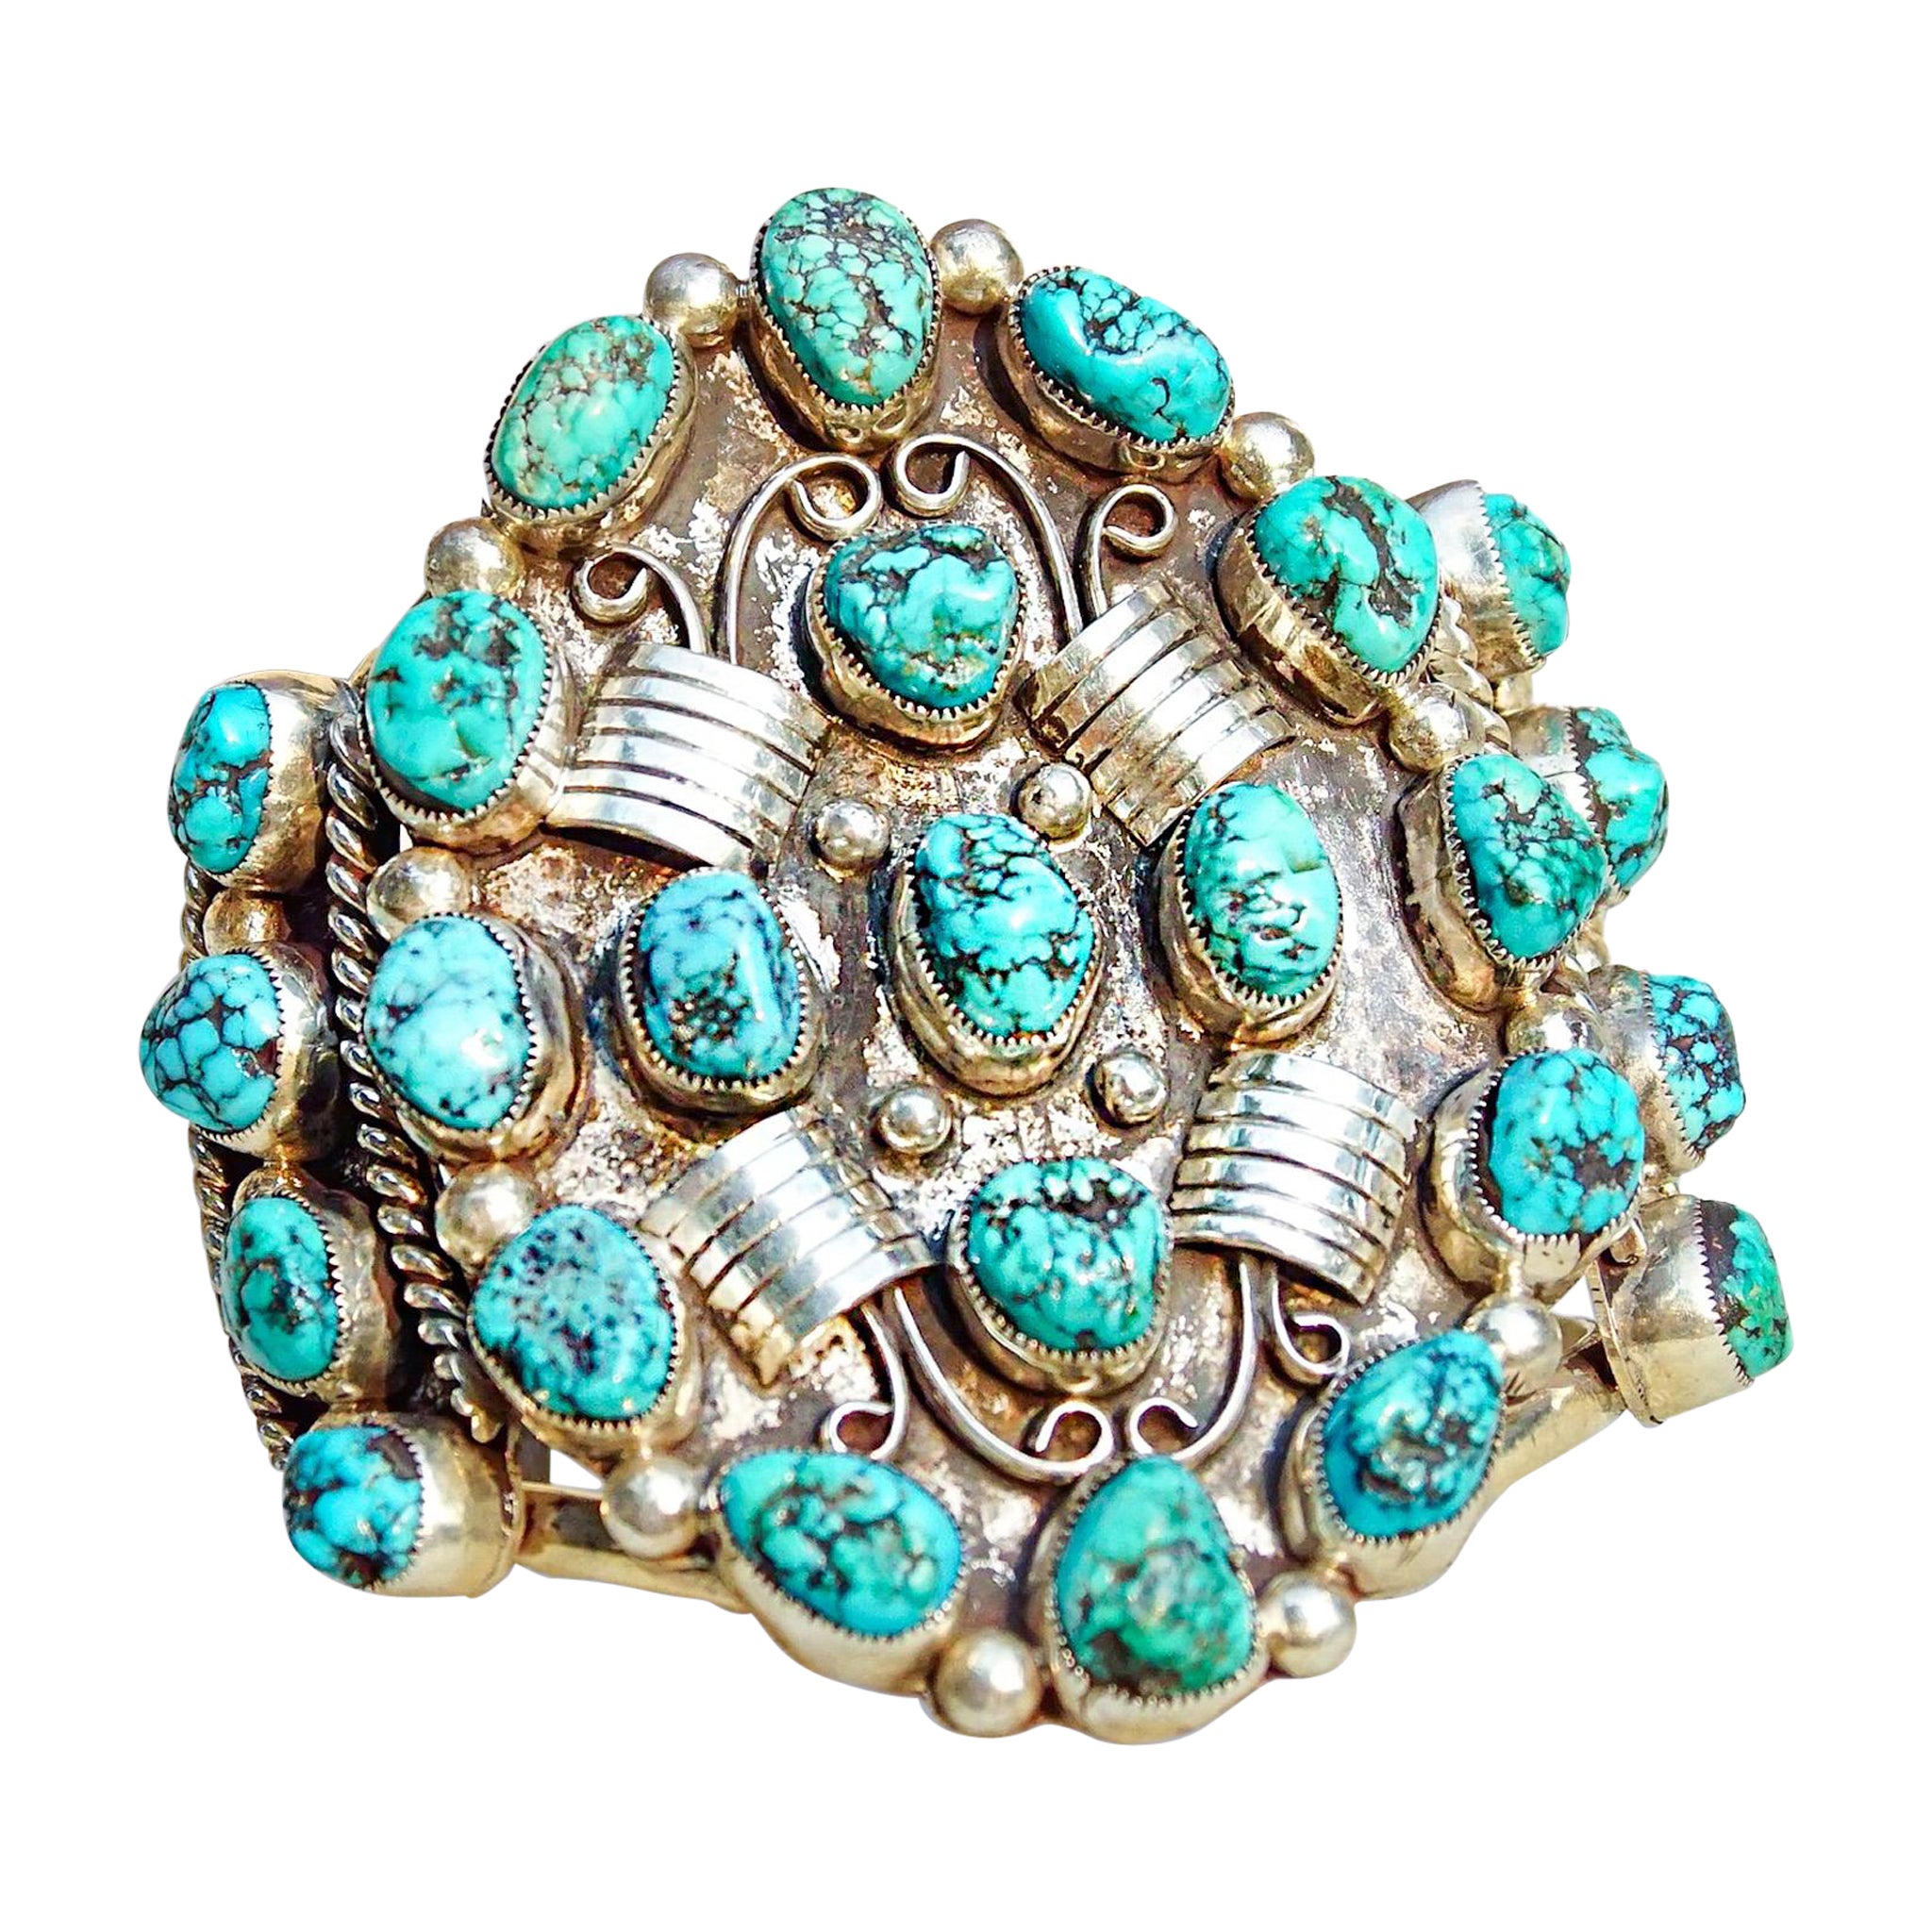 Pat Platero HUGE Navajo Sterling Silver Turquoise Cluster Cuff Bracelet